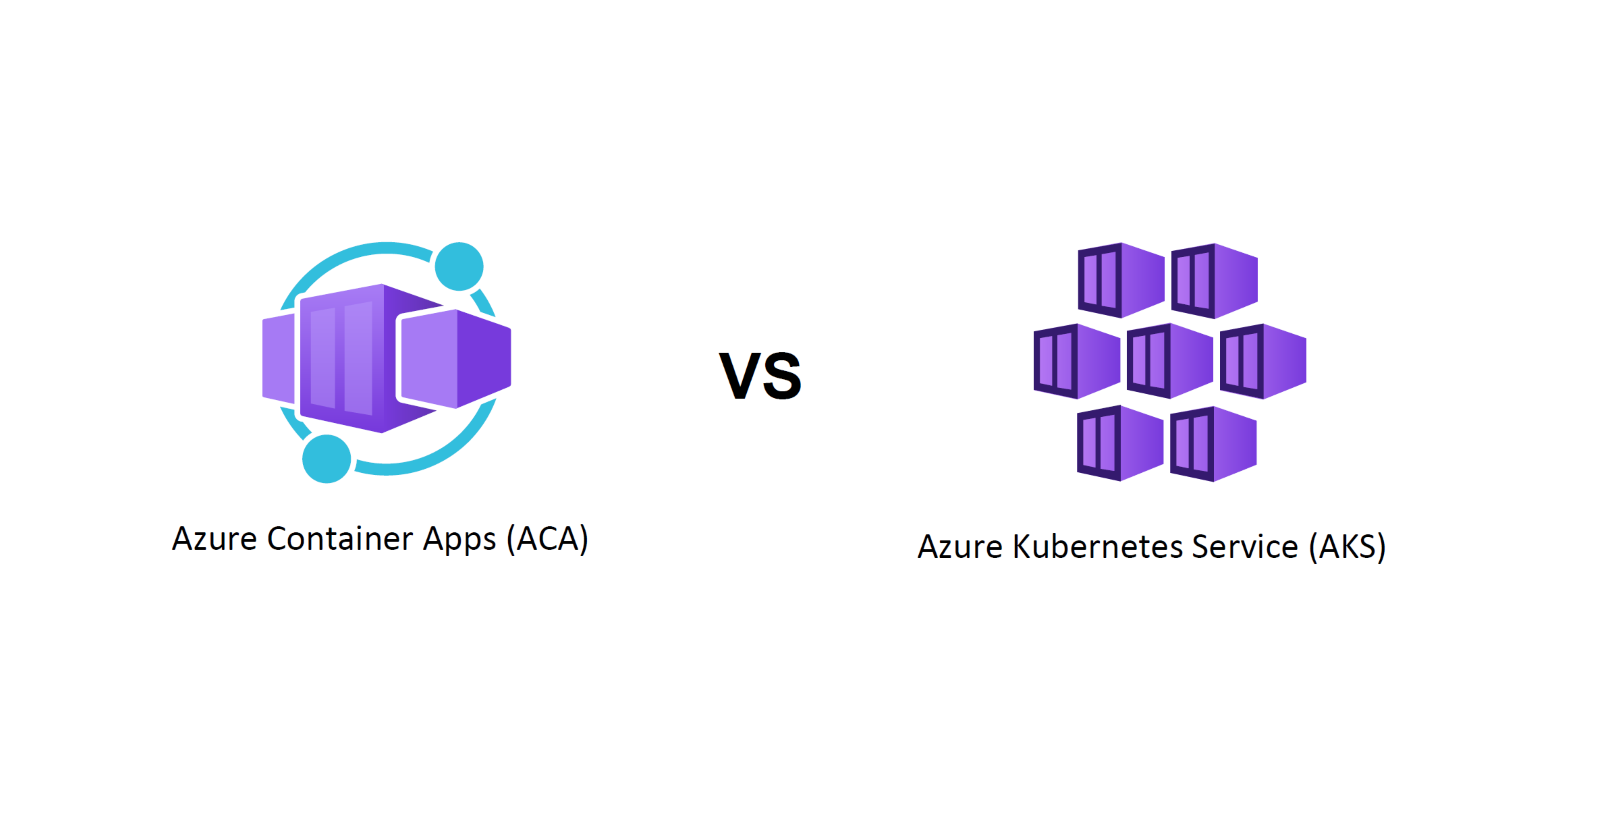 ACA vs AKS: Azure Services for Containerized Apps